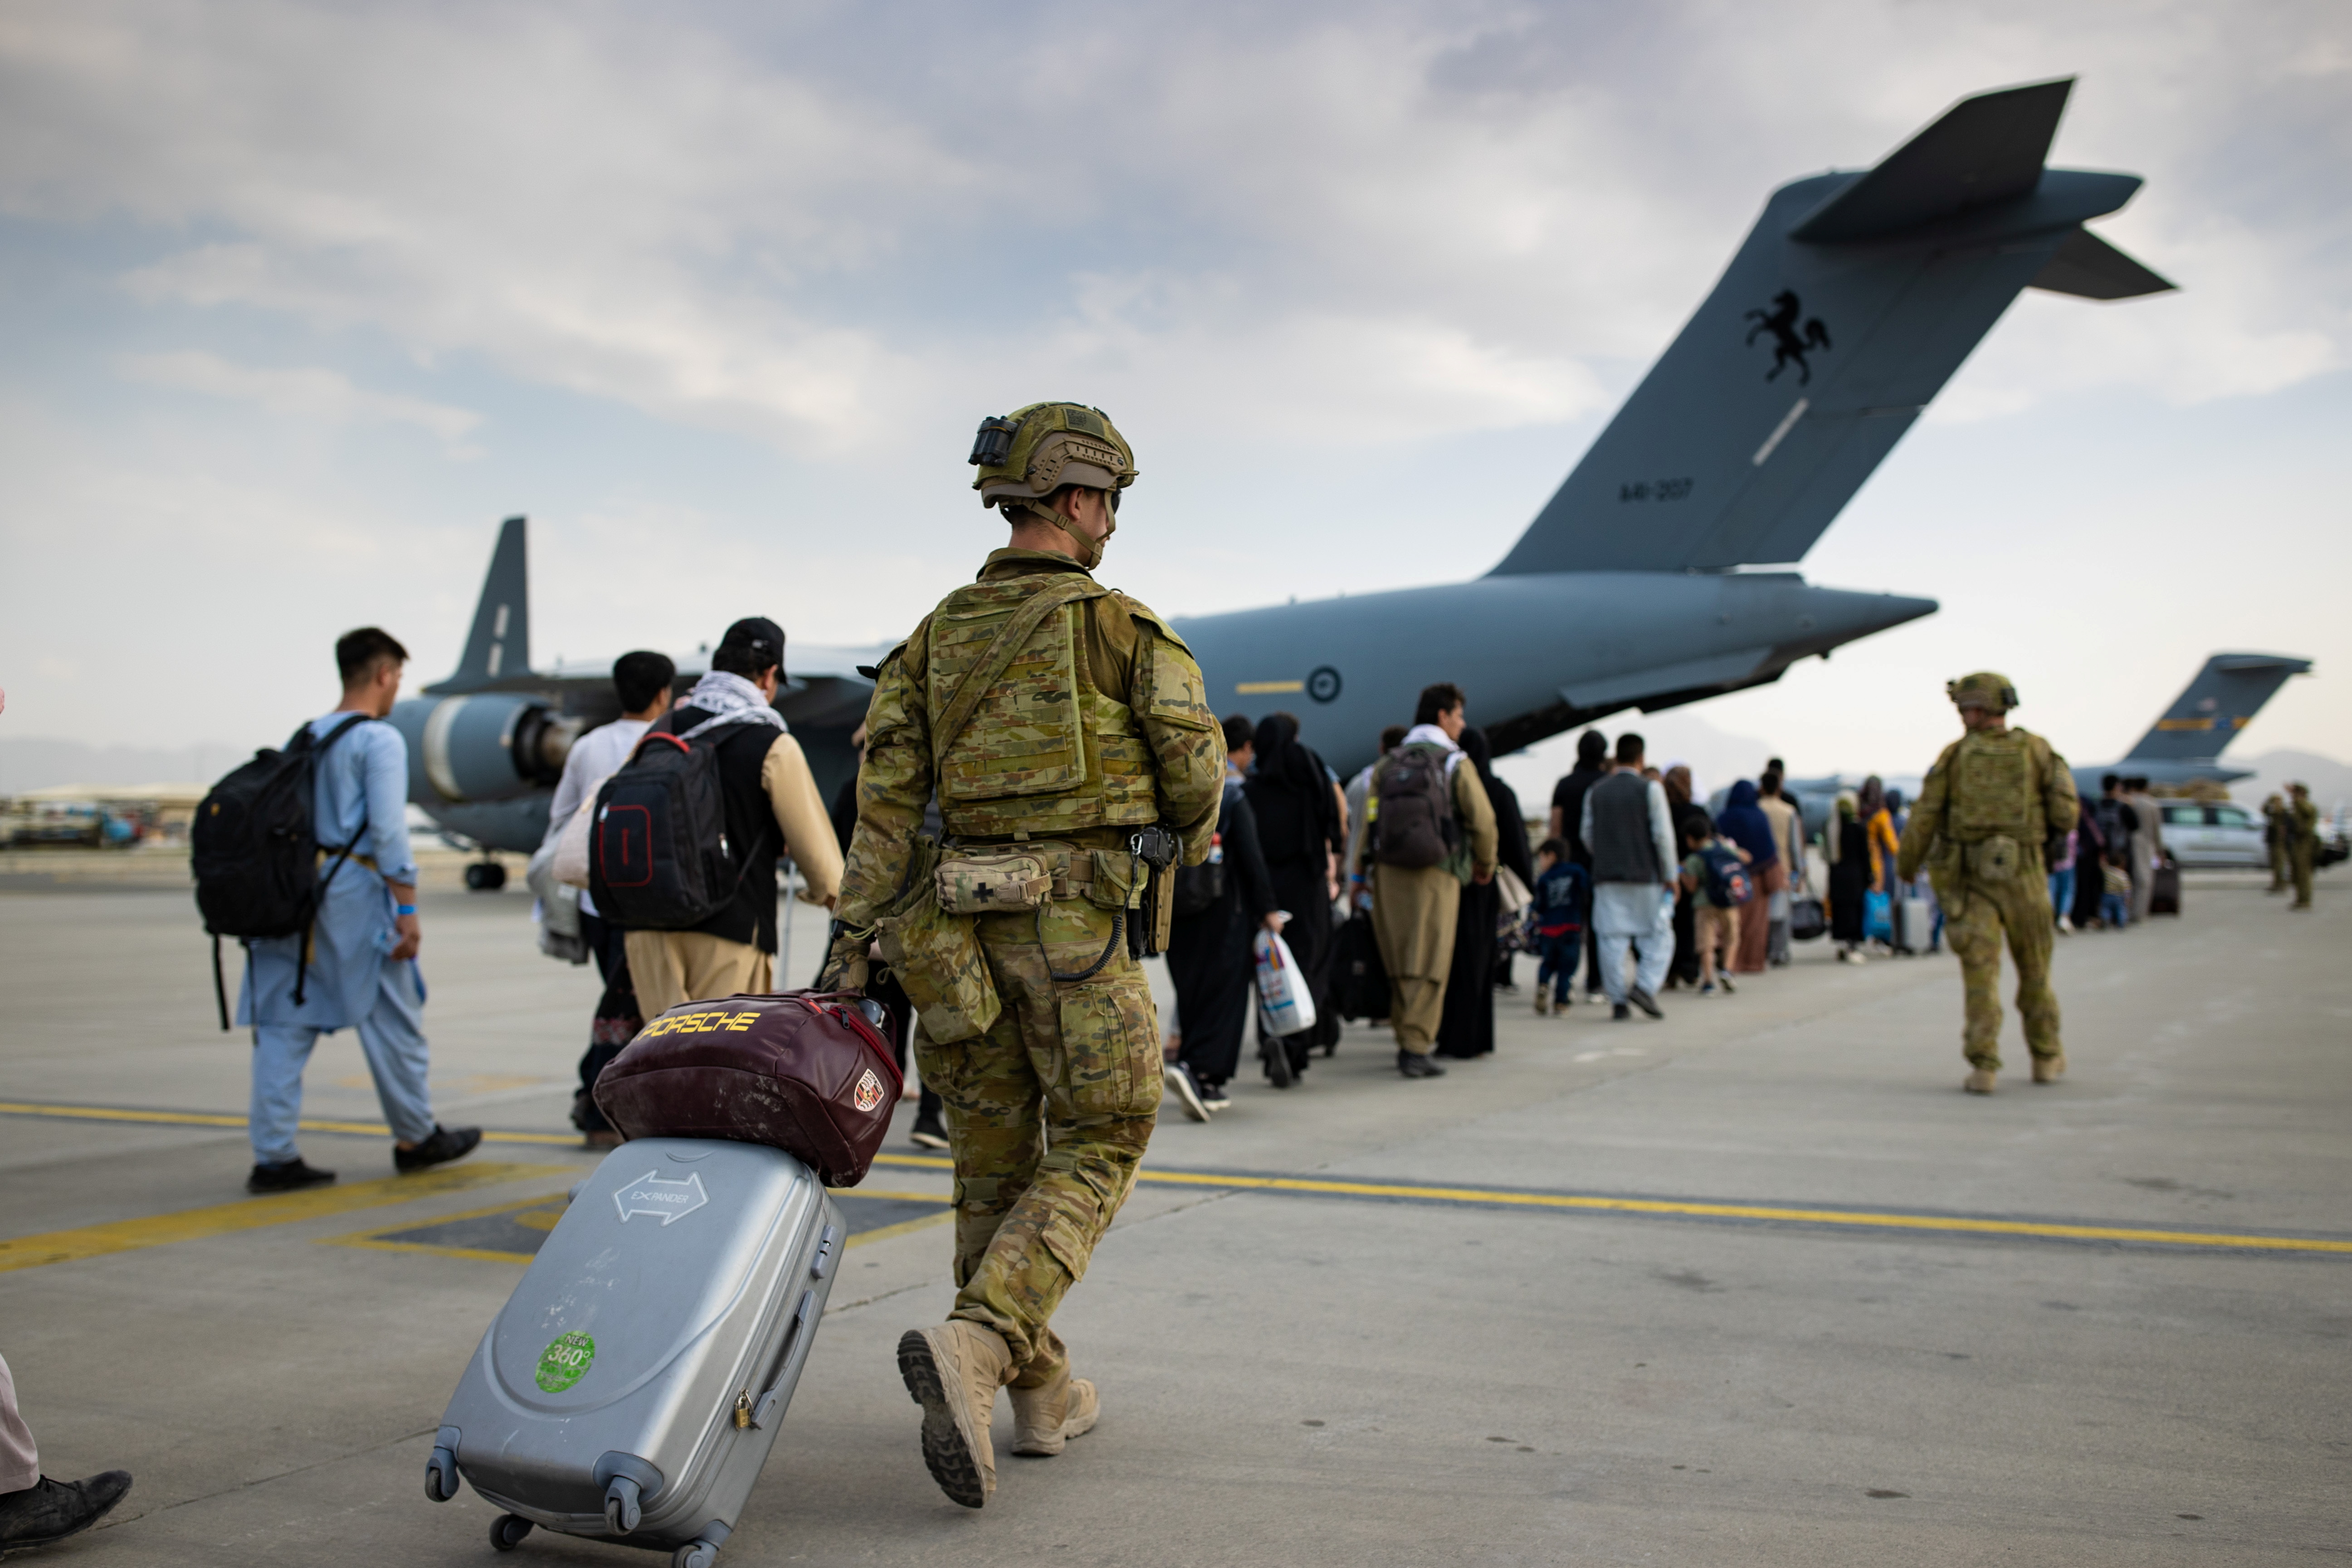 Australia Afghanistan evacuations after Kabul suicide attacks | Reuters